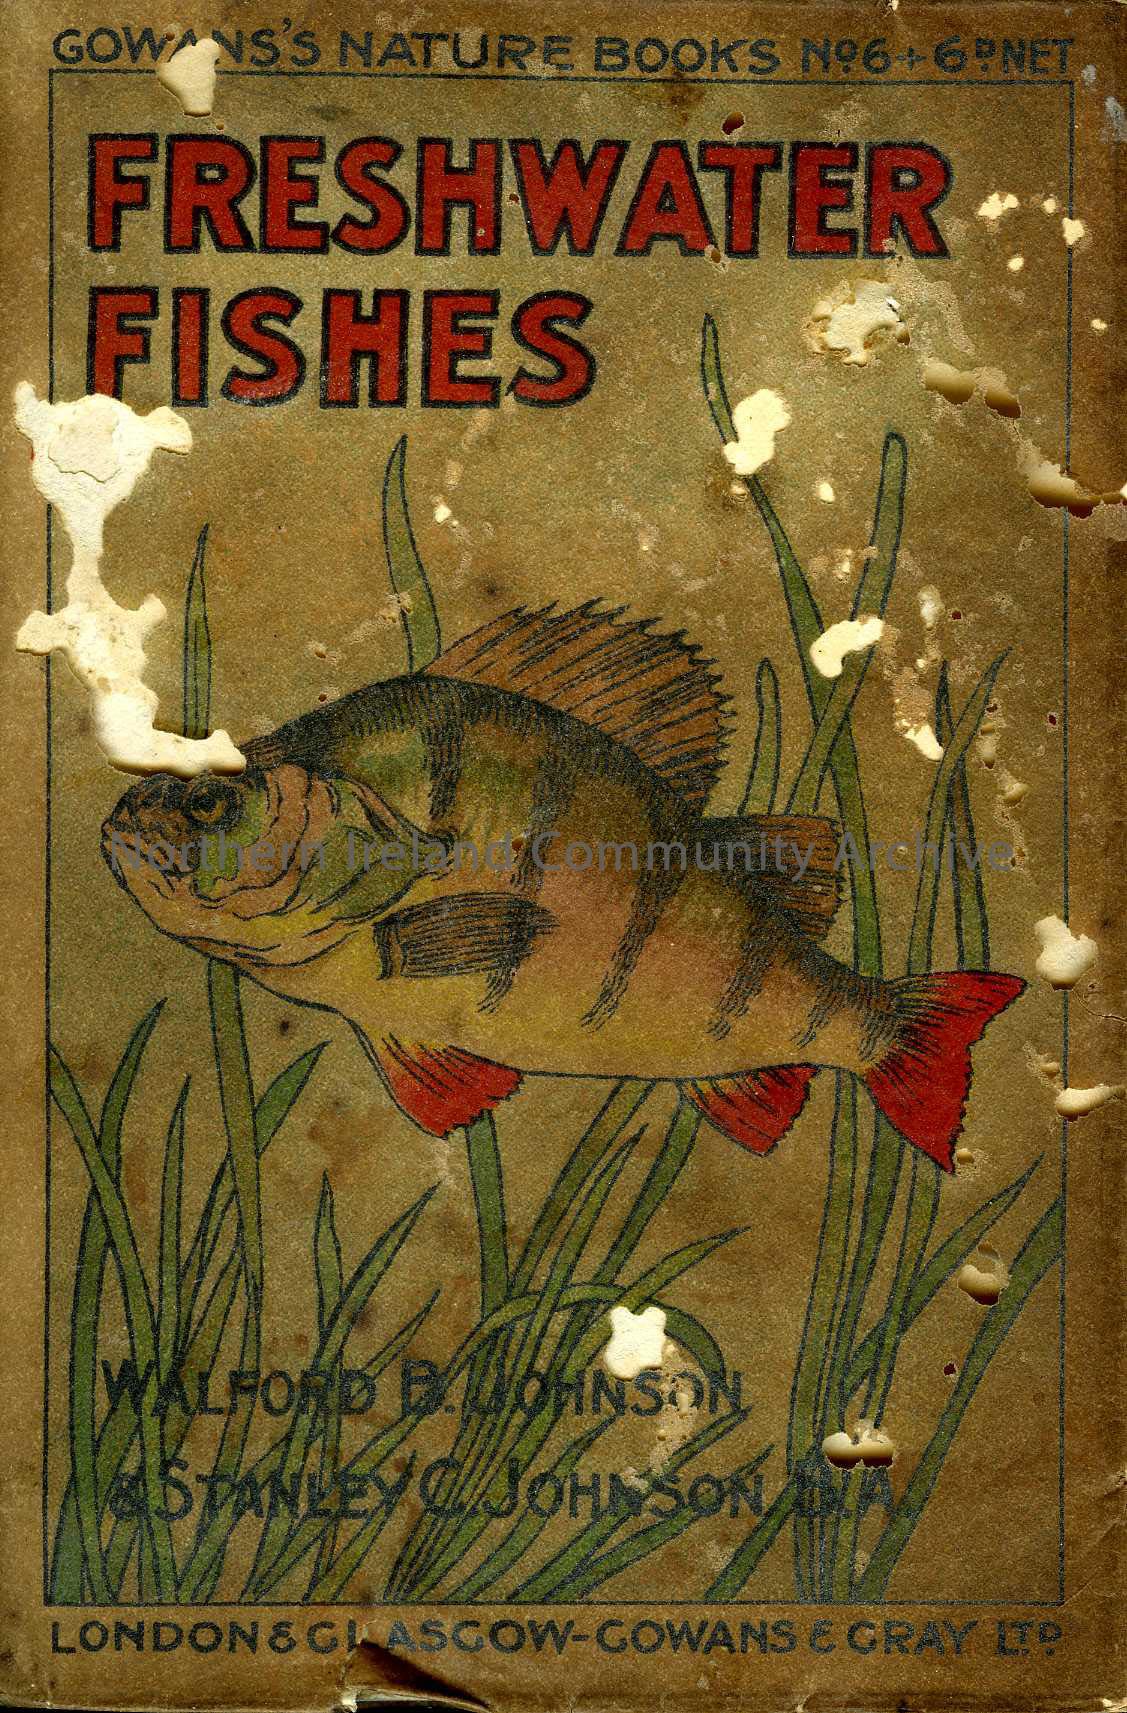 Freshwater Fishes.